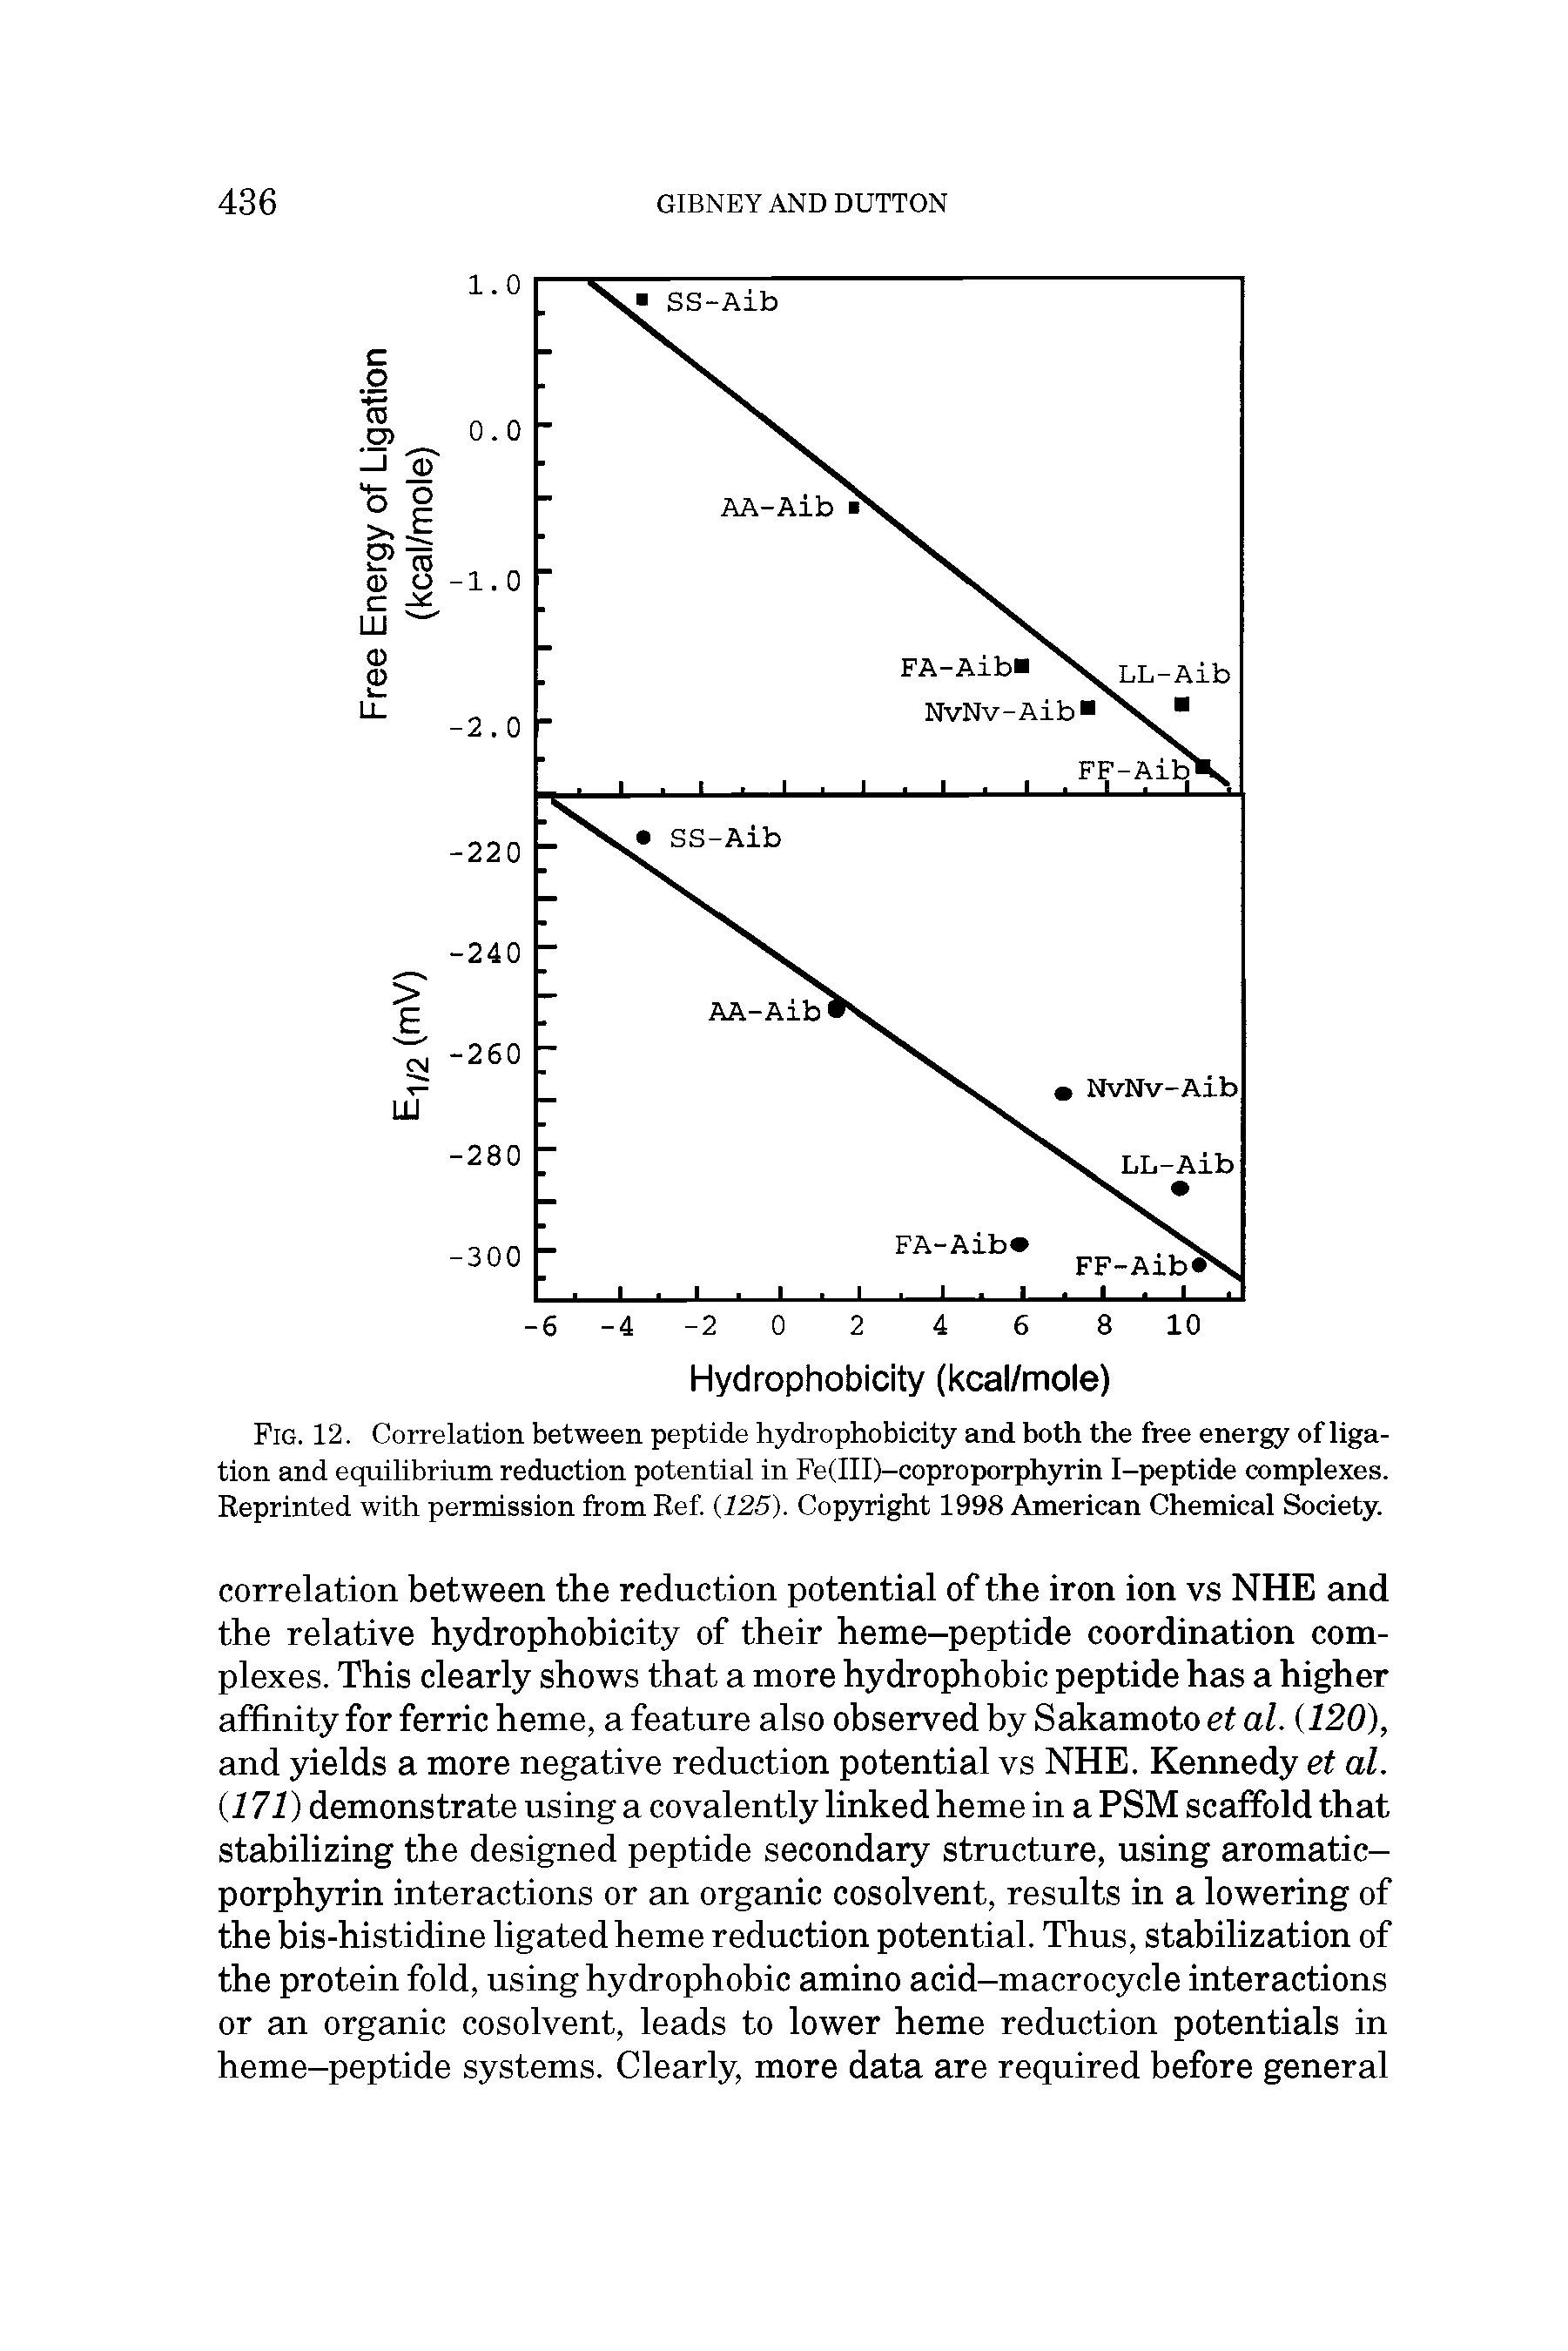 Fig. 12. Correlation between peptide hydrophobicity and both the free energy of ligation and equilibrium reduction potential in Fe(III)-coproporphyrin I-peptide complexes. Reprinted with permission from Ref. (.125). Copyright 1998 American Chemical Society.